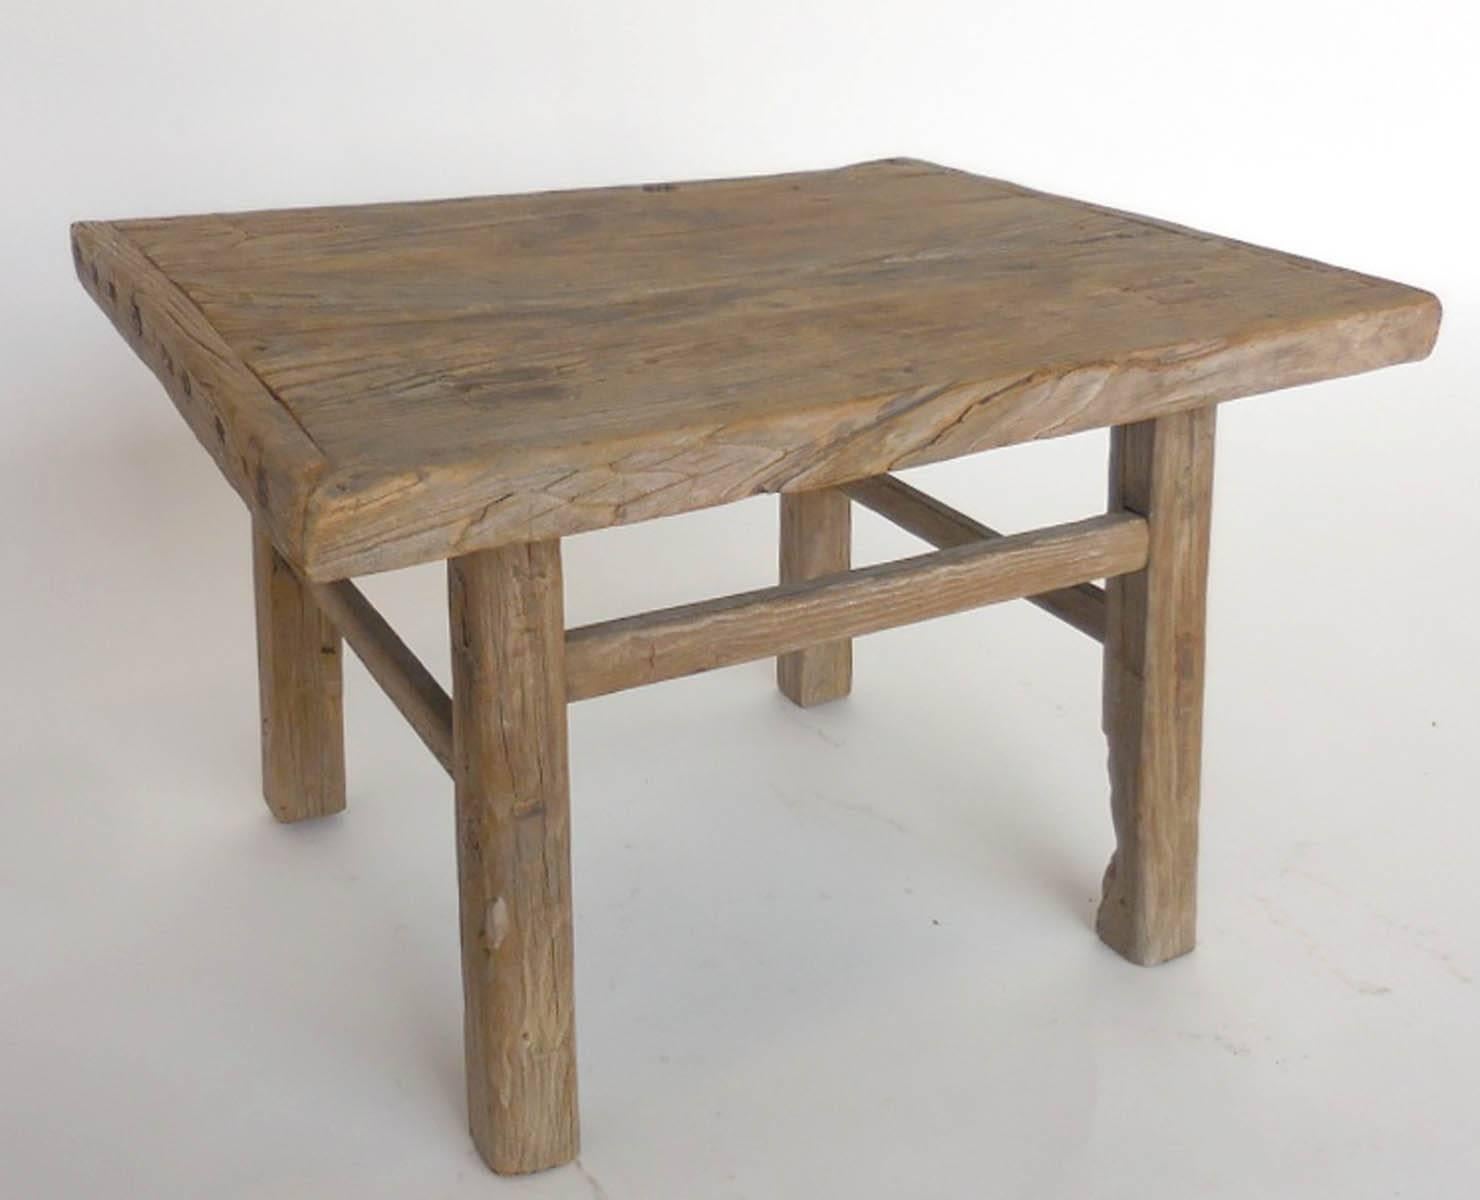 Small rectangular antique elm table from China. Mortise and tenon construction. Weathered wood with naturally worn patina.